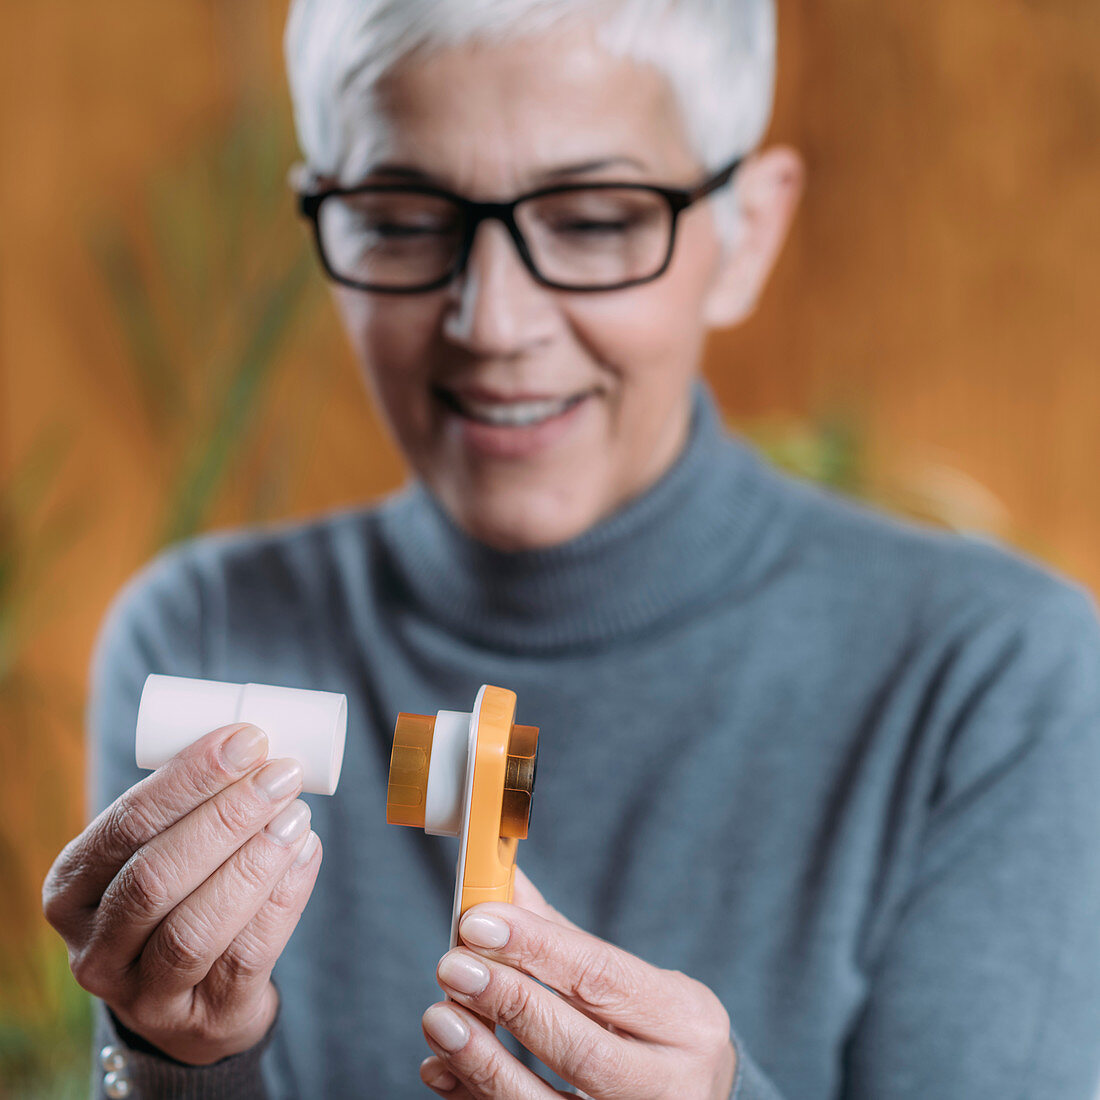 Woman measuring lung capacity and peak expiratory force